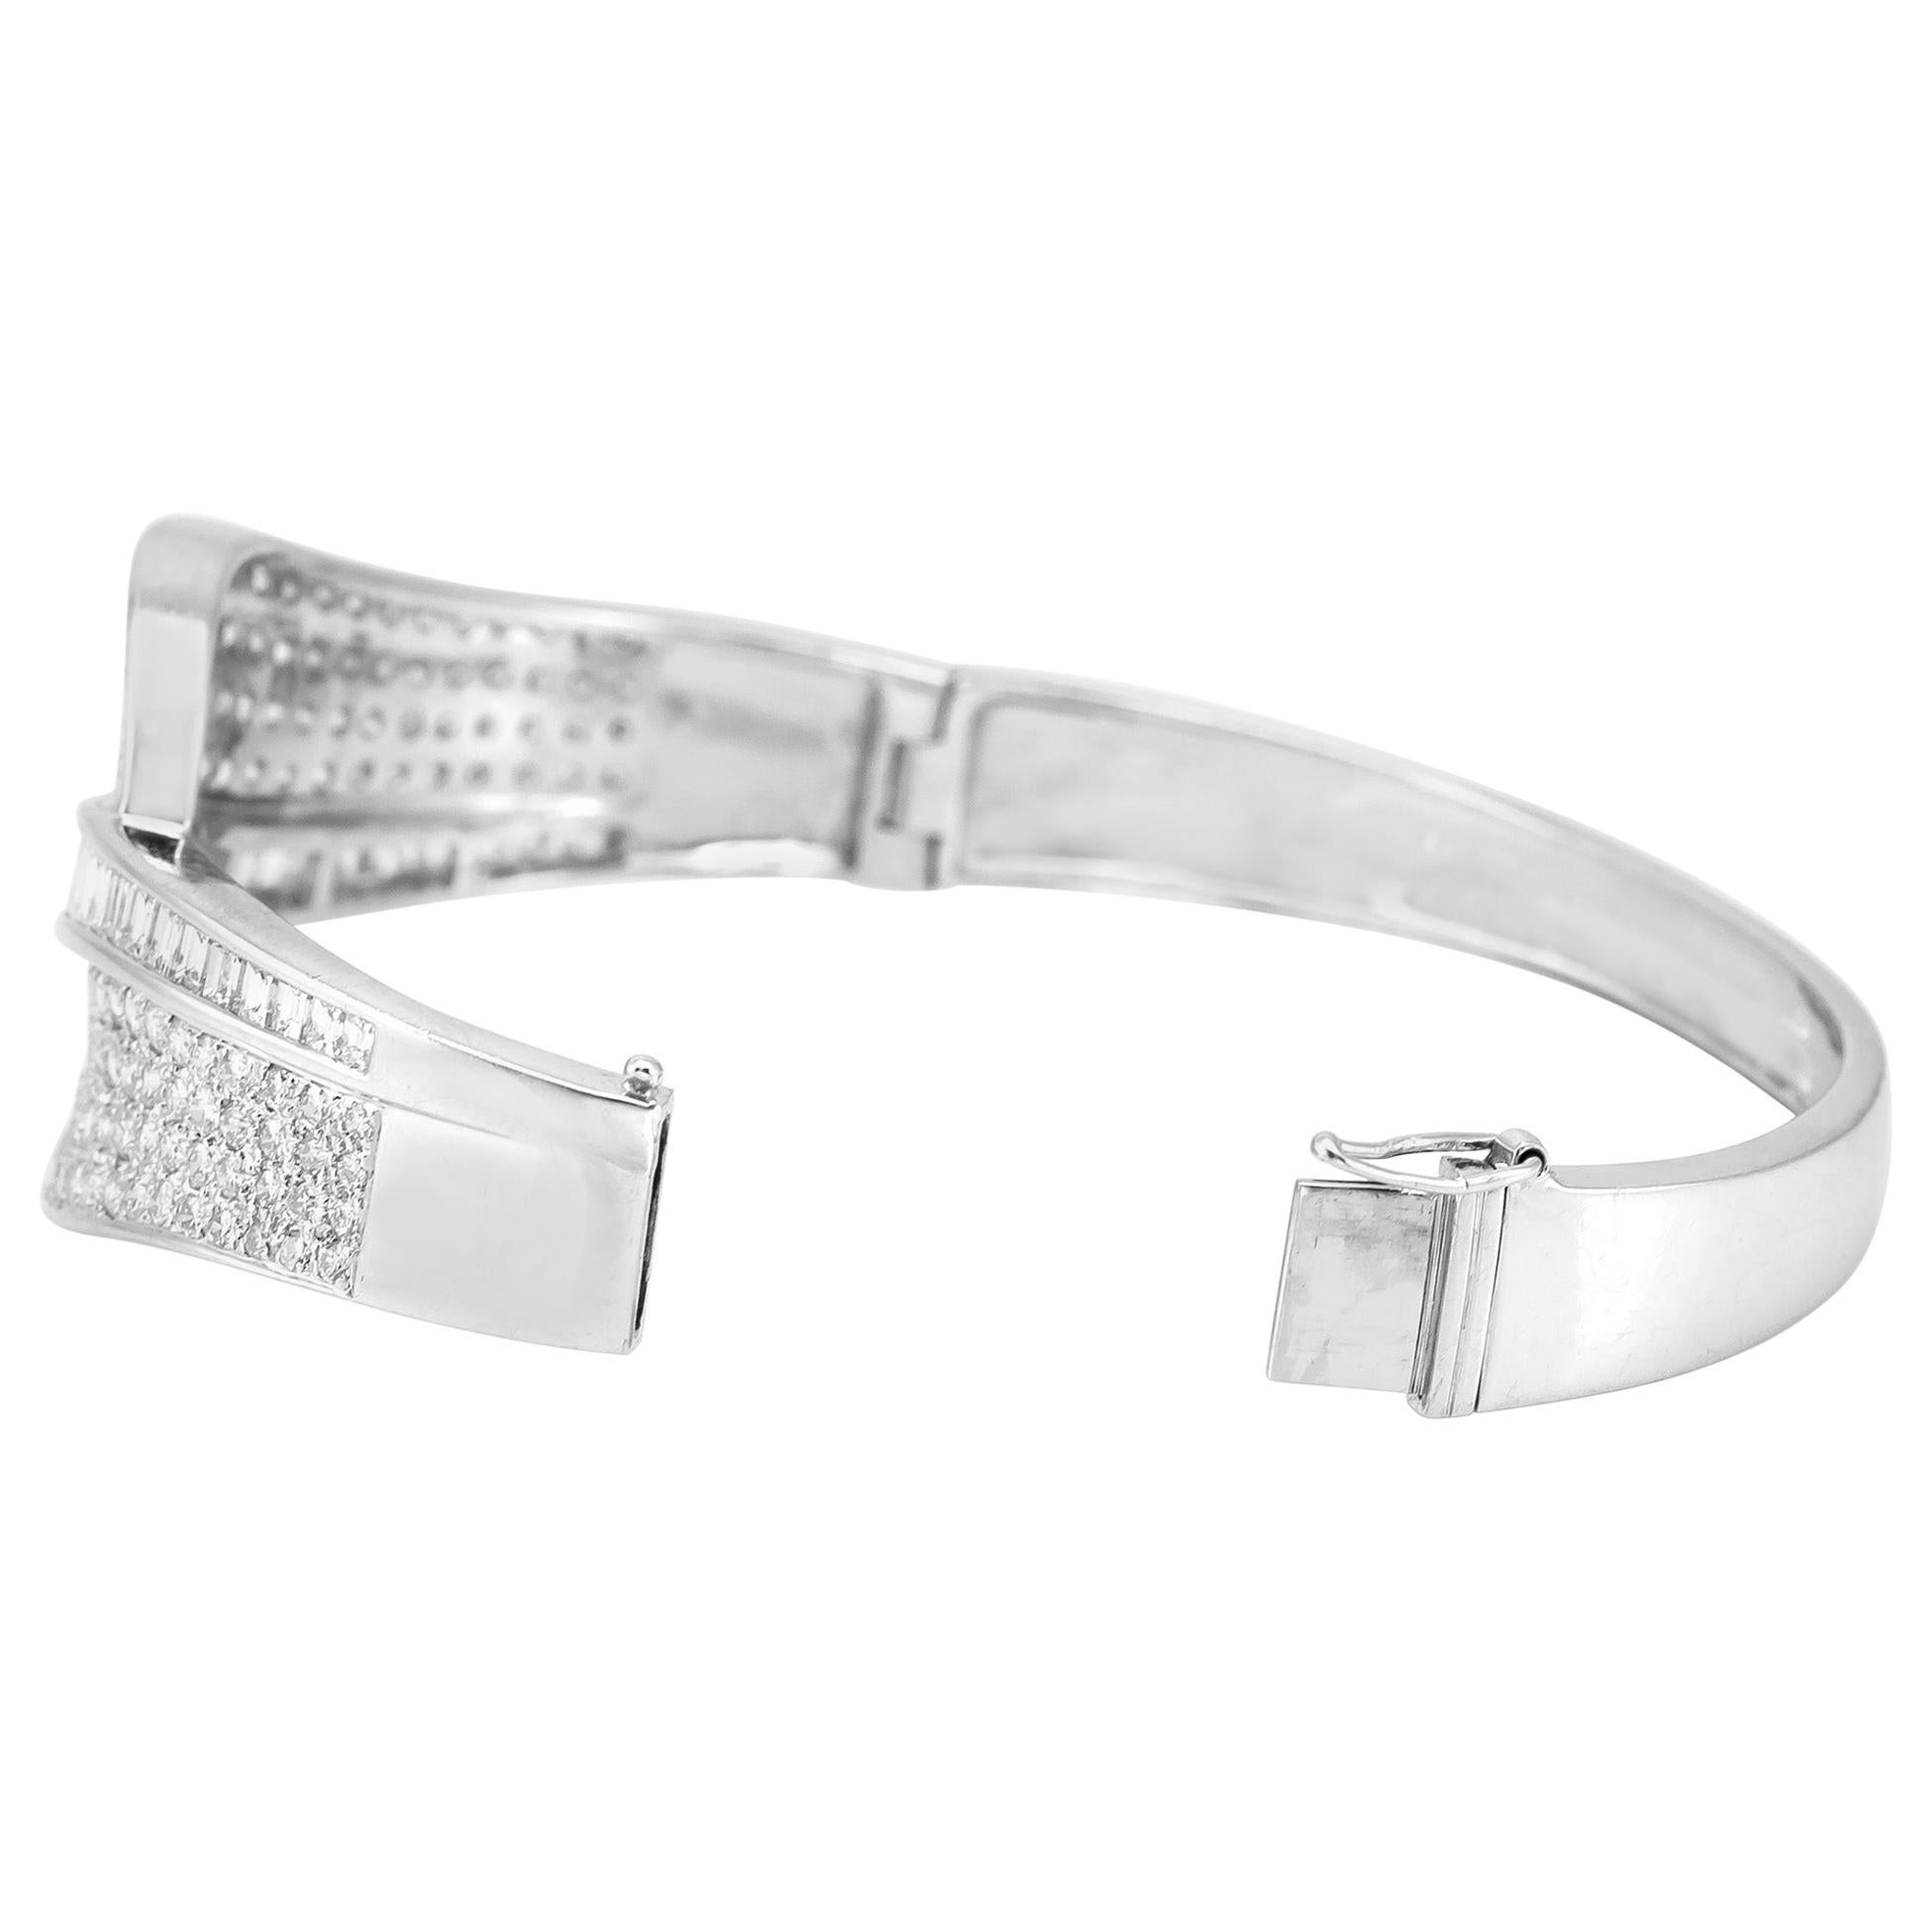 This bangle is finely crafted in 18K white gold. 
The diamonds are emerald cut and round brilliant, weighing an approximate total of 11.23 carat.
Circa 2000